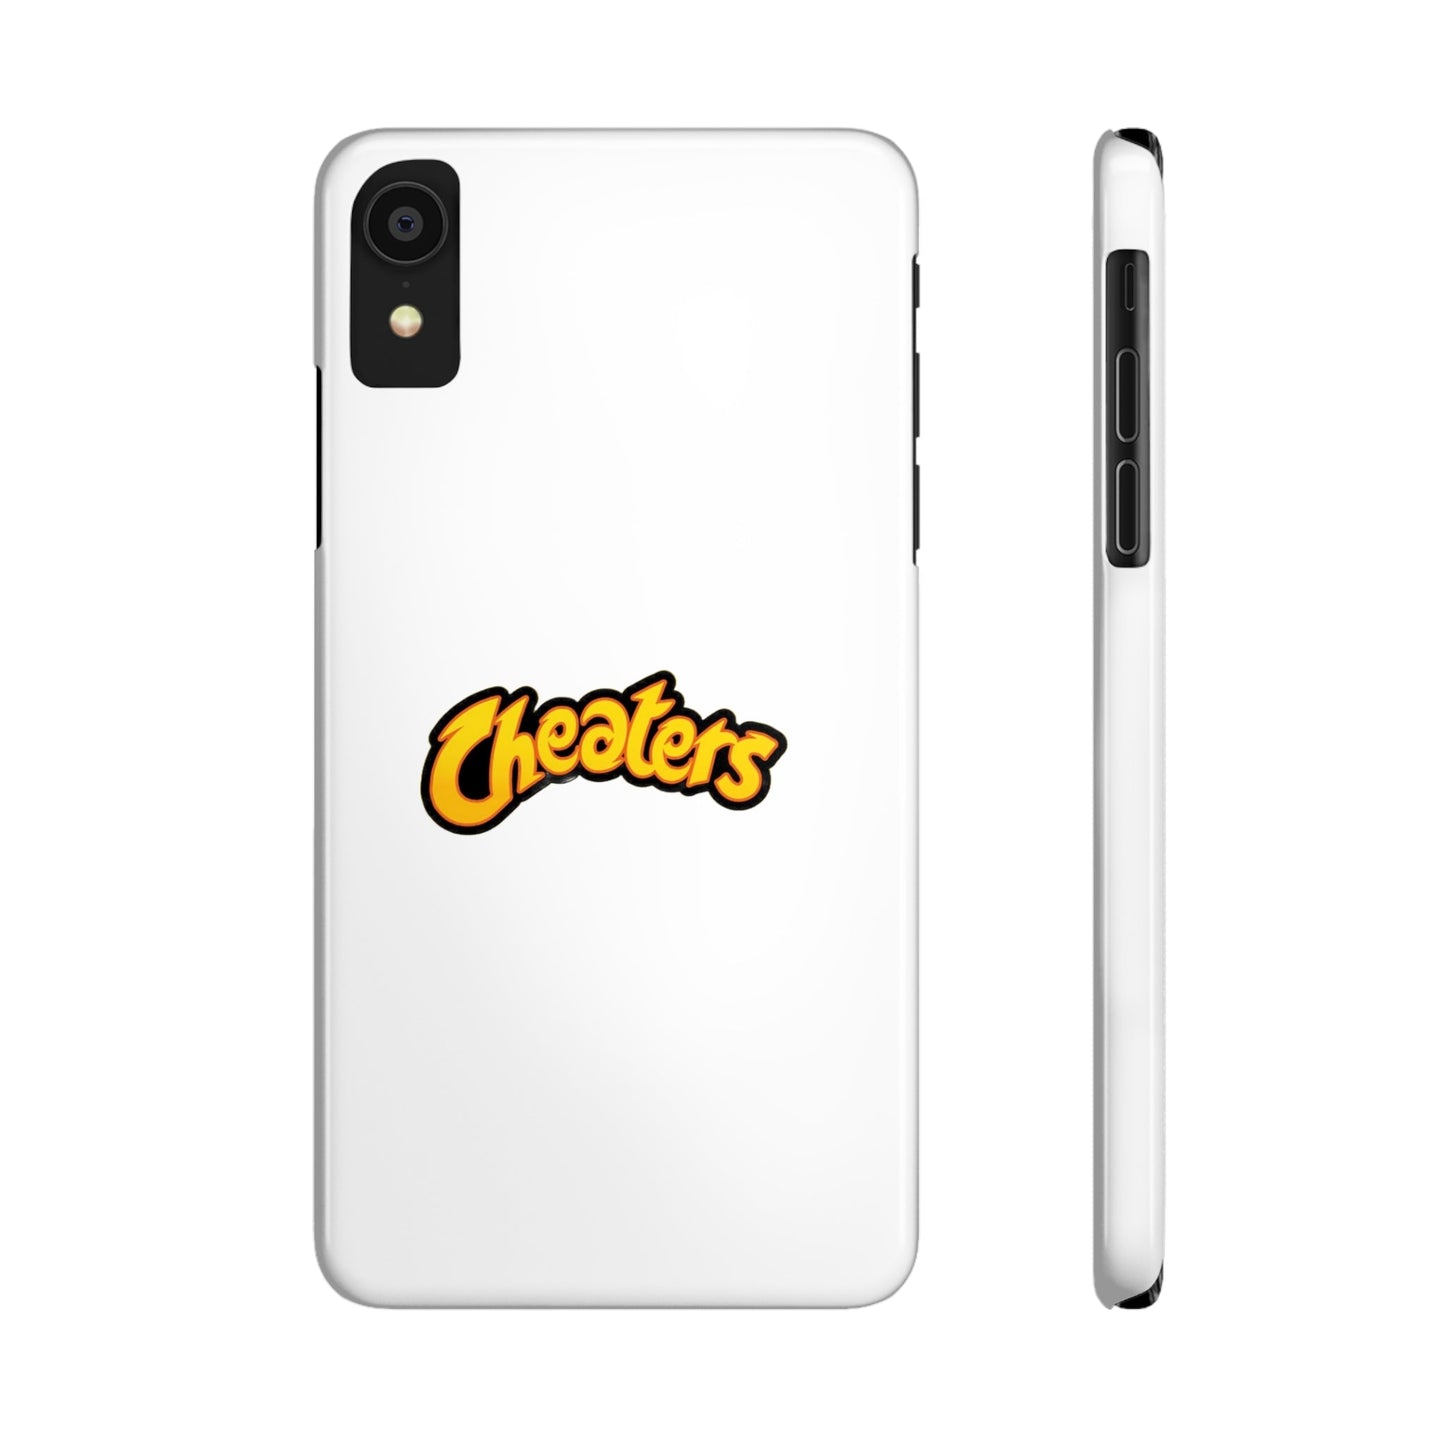 "Cheaters" MagStrong Phone Cases iPhone XR